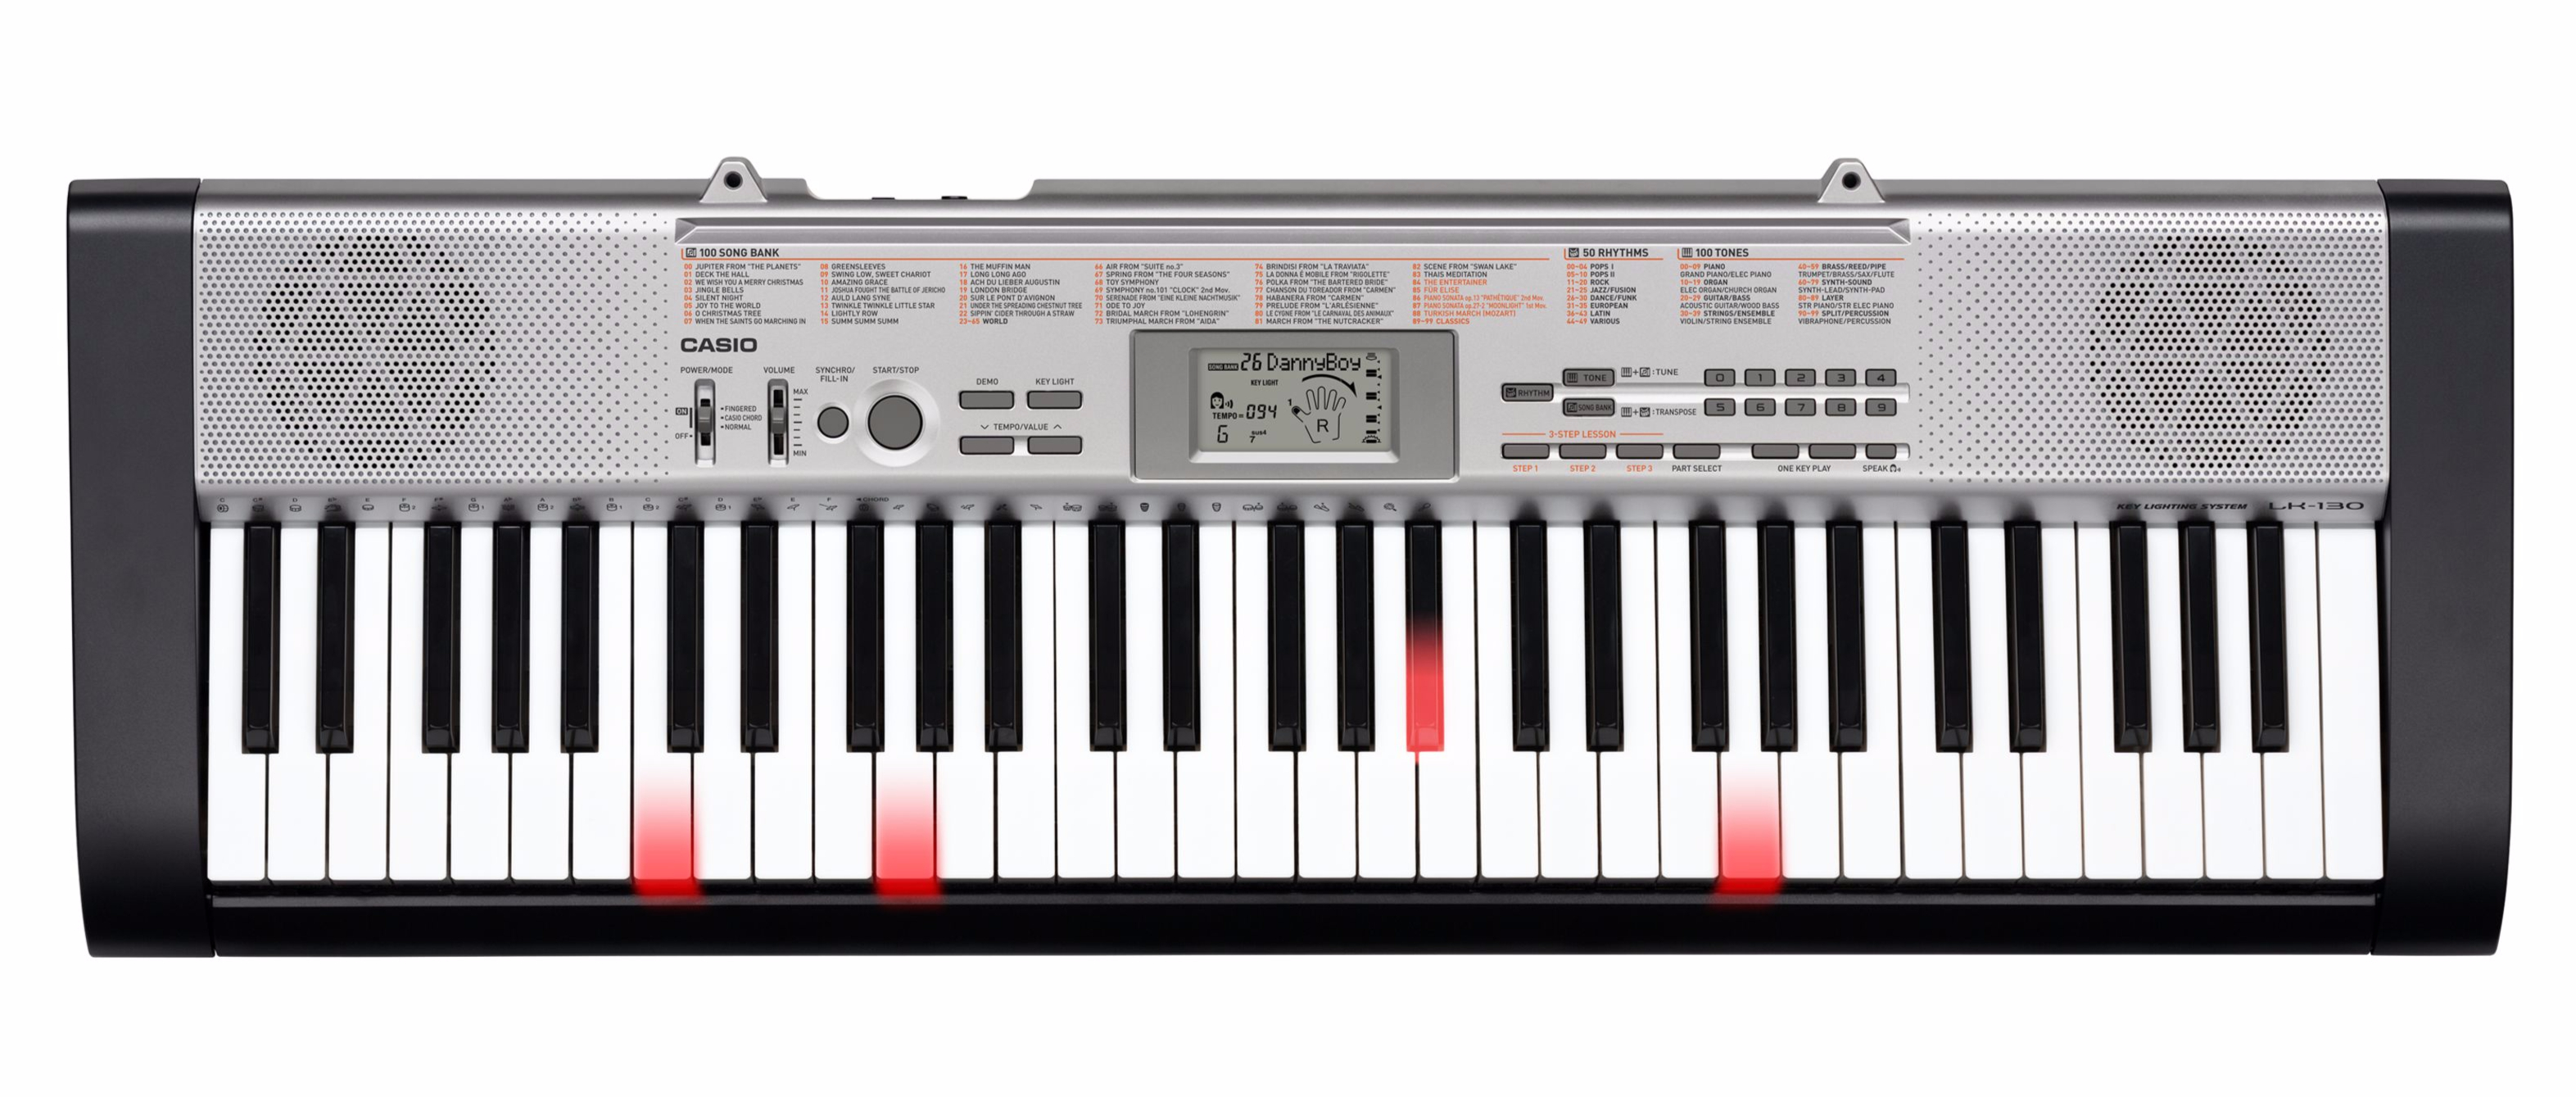 Casio LK-130 keyboard lighted keys favorable buying at our shop